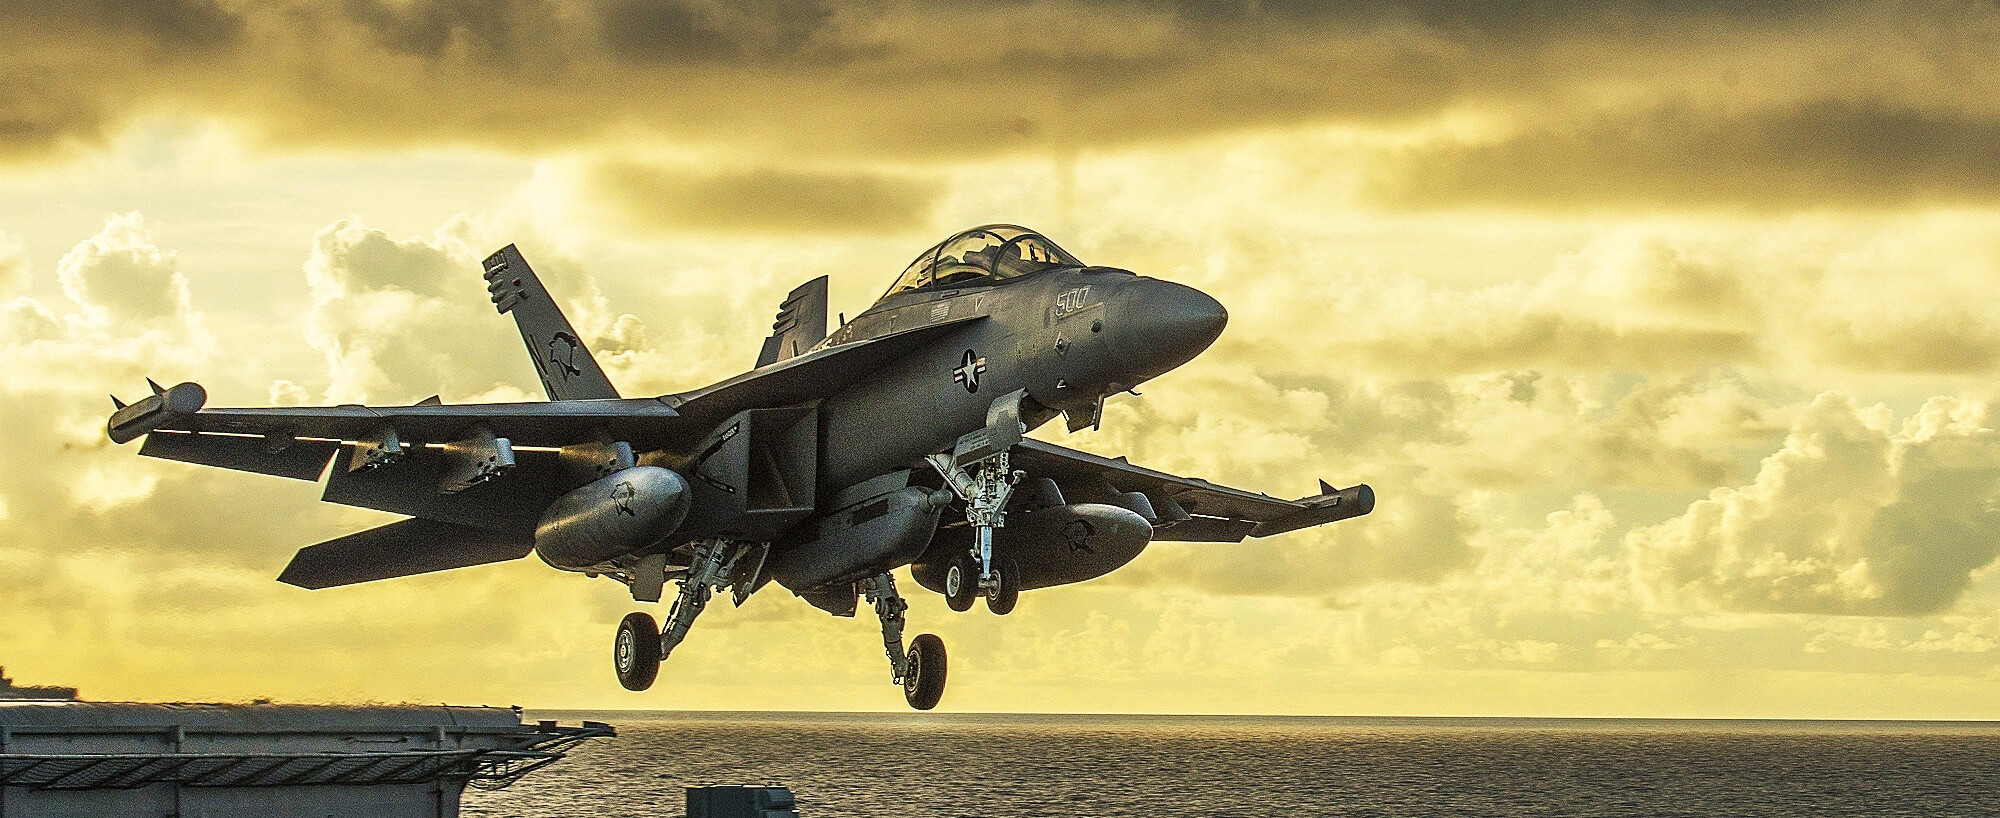 A fighter jet taking off from an aircraft carrier